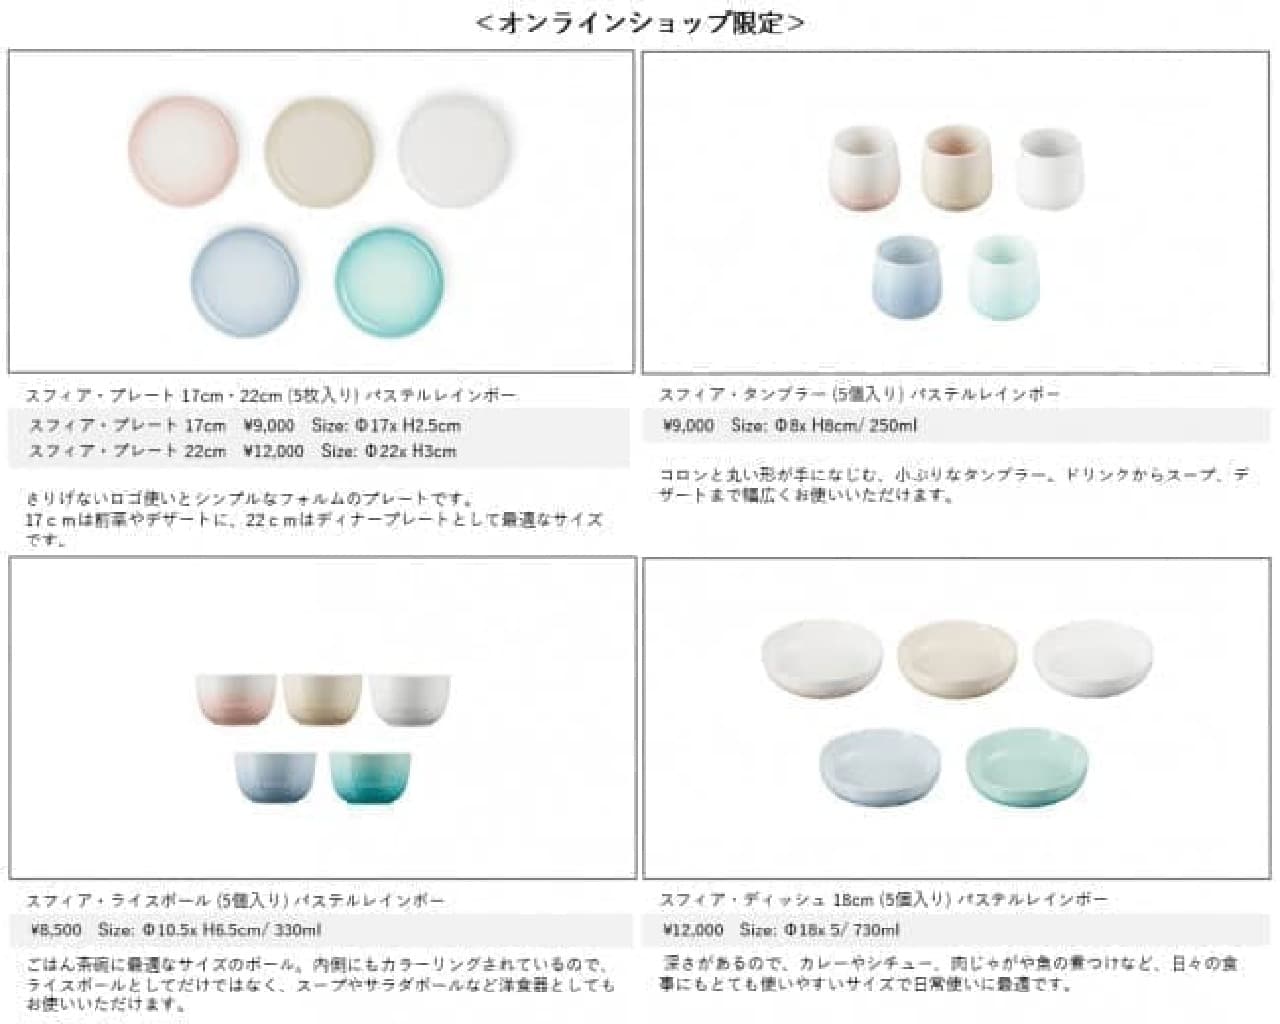 ・ Cocotte Every 20 (6 colors available) 25,000 yen ・ Cocotte Every 20 Inner lid 2,000 yen